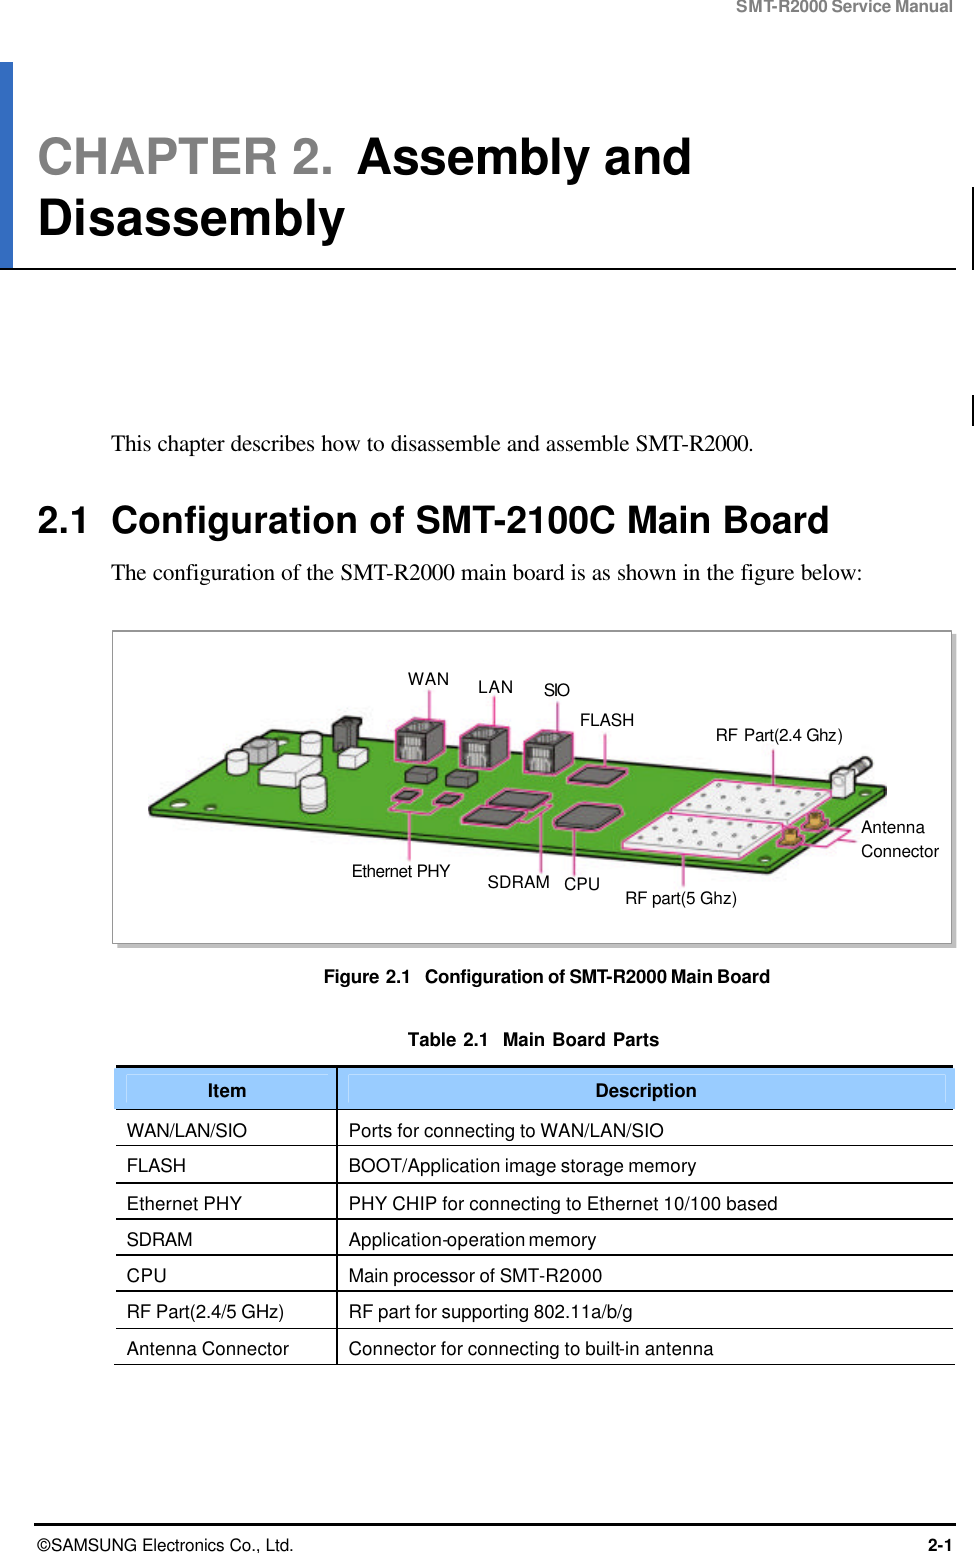 SMT-R2000 Service Manual © SAMSUNG Electronics Co., Ltd. 2-1 CHAPTER 2.  Assembly and Disassembly      This chapter describes how to disassemble and assemble SMT-R2000.  2.1 Configuration of SMT-2100C Main Board The configuration of the SMT-R2000 main board is as shown in the figure below:  Figure 2.1  Configuration of SMT-R2000 Main Board  Table 2.1  Main Board Parts Item Description WAN/LAN/SIO Ports for connecting to WAN/LAN/SIO FLASH BOOT/Application image storage memory Ethernet PHY PHY CHIP for connecting to Ethernet 10/100 based   SDRAM Application-operation memory   CPU Main processor of SMT-R2000 RF Part(2.4/5 GHz) RF part for supporting 802.11a/b/g Antenna Connector Connector for connecting to built-in antenna WAN LAN SIO FLASH CPU RF Part(2.4 Ghz) SDRAM Antenna Connector RF part(5 Ghz) Ethernet PHY  